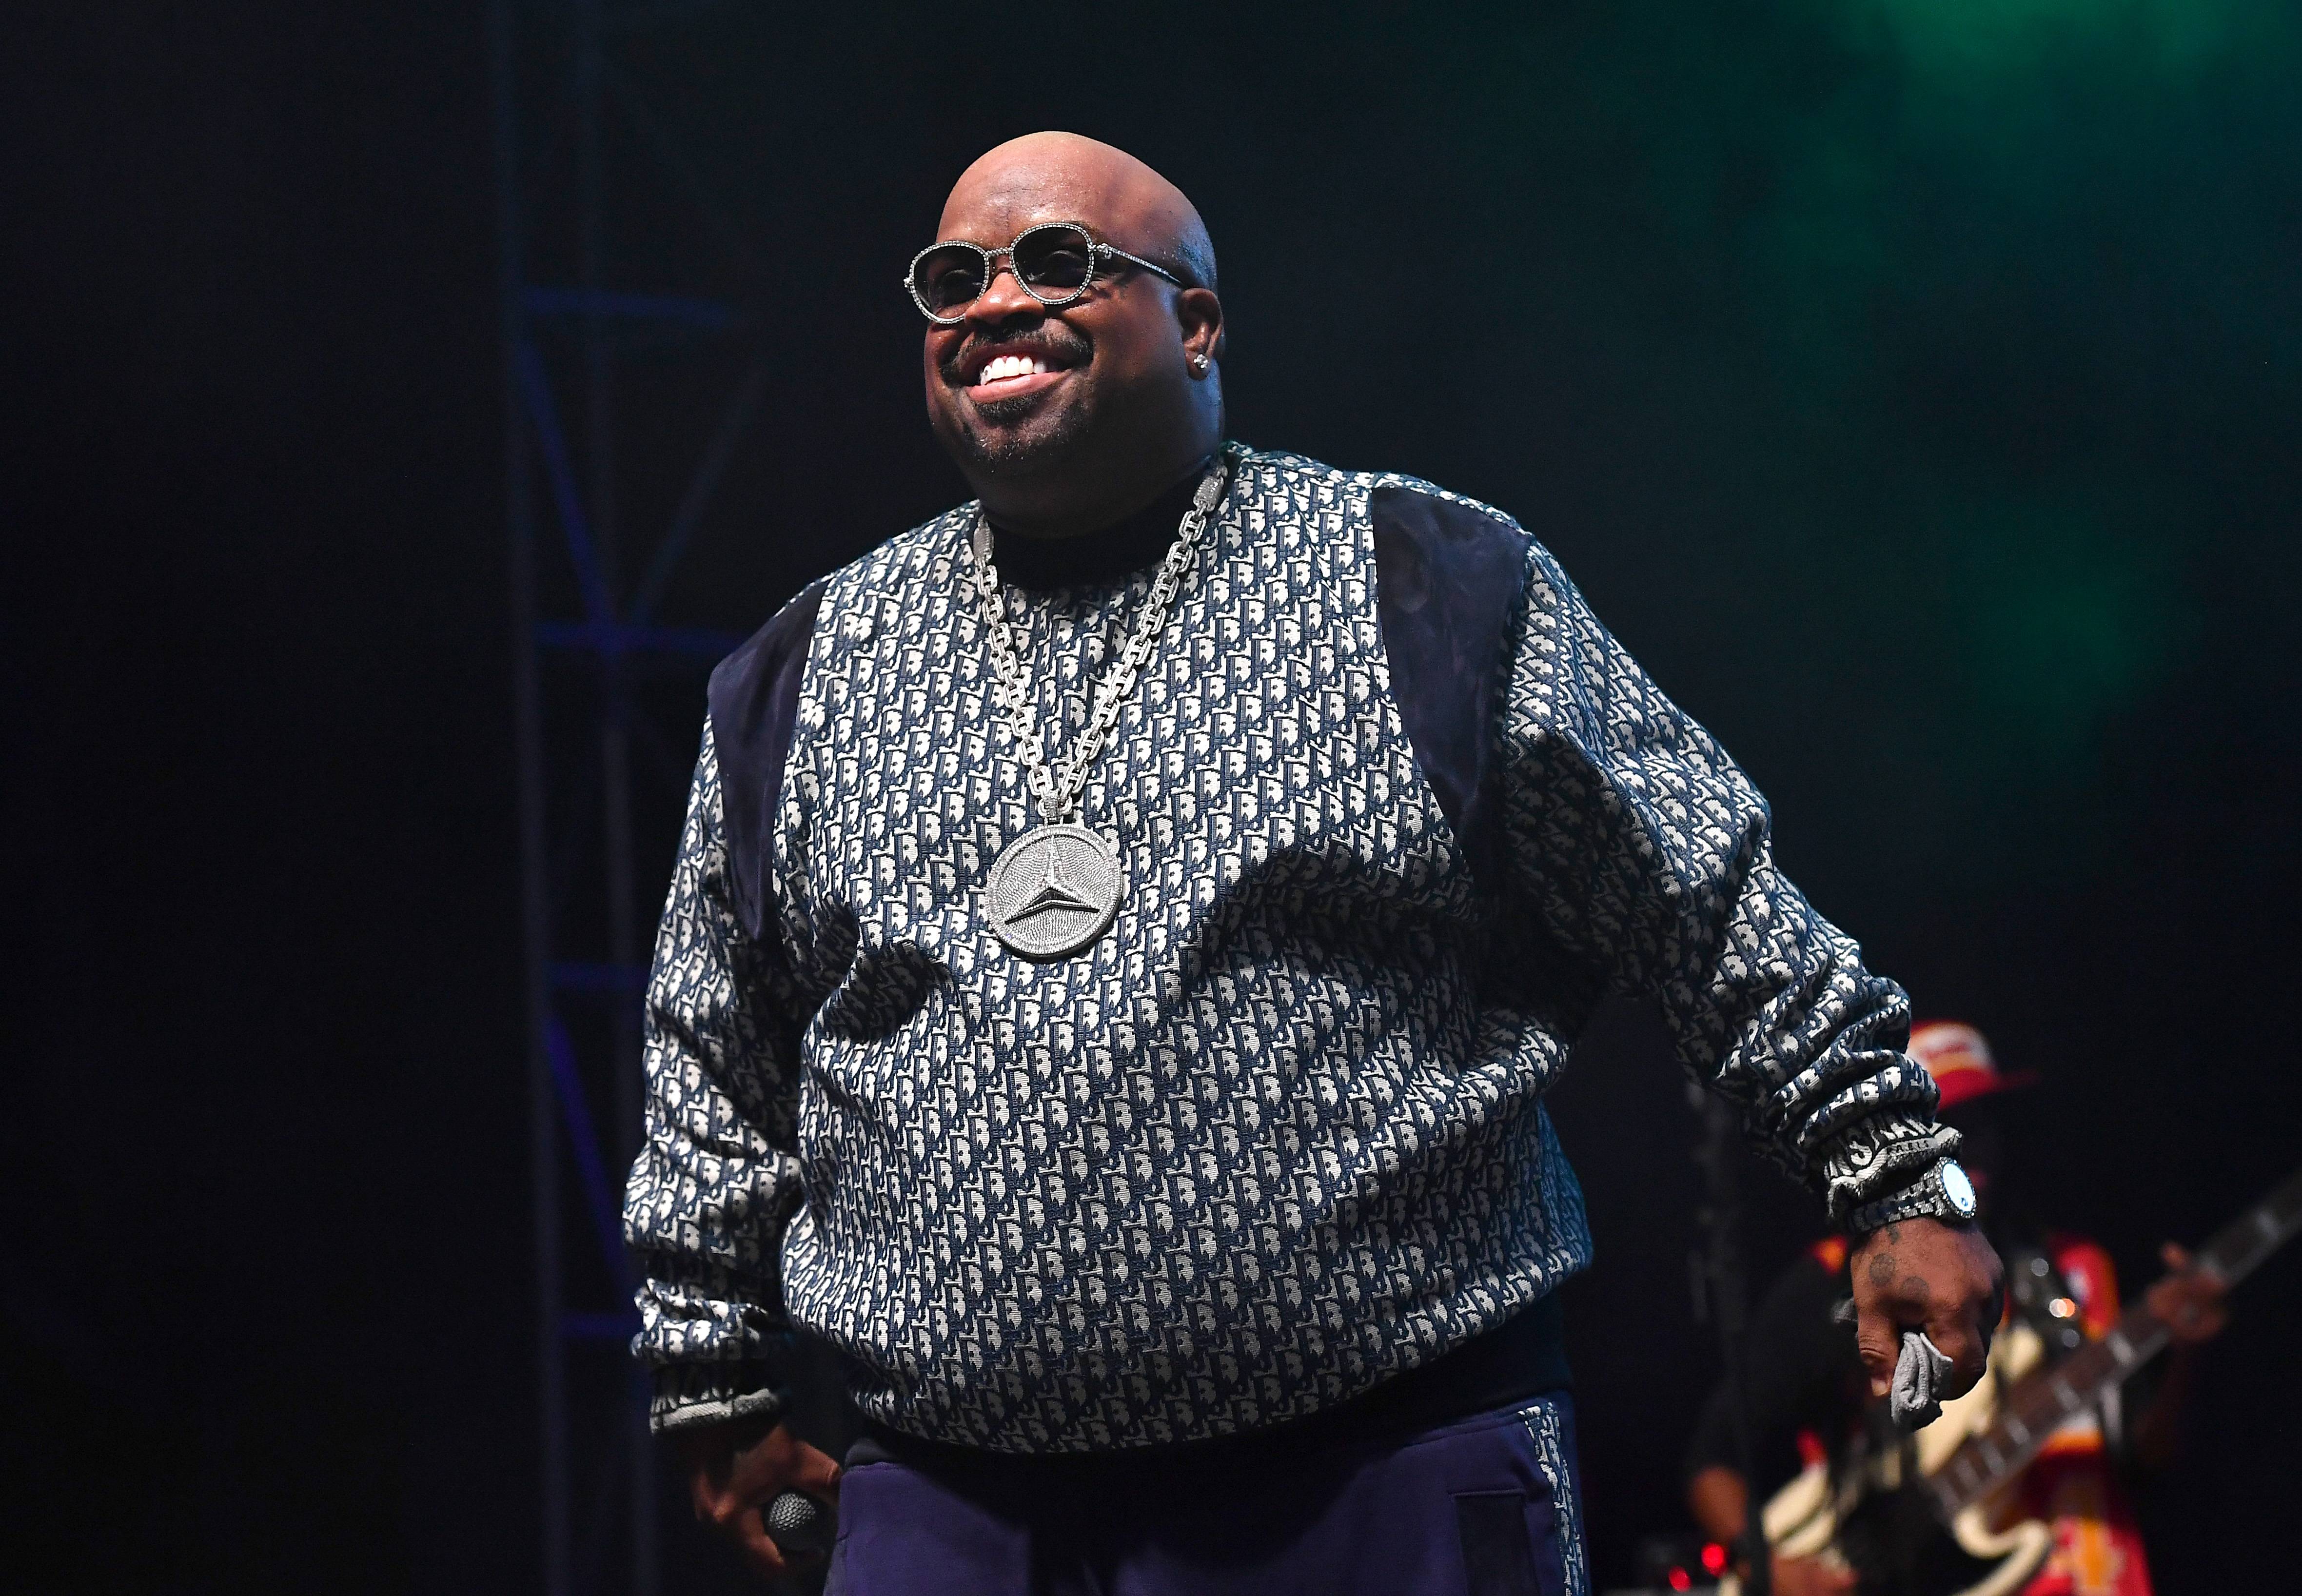 ATLANTA, GEORGIA - OCTOBER 25:  Ceelo Green performs onstage during night 3 of Big Night Out ATL at Centennial Olympic Park on October 25, 2020 in Atlanta, Georgia. (Photo by Paras Griffin/Getty Images)